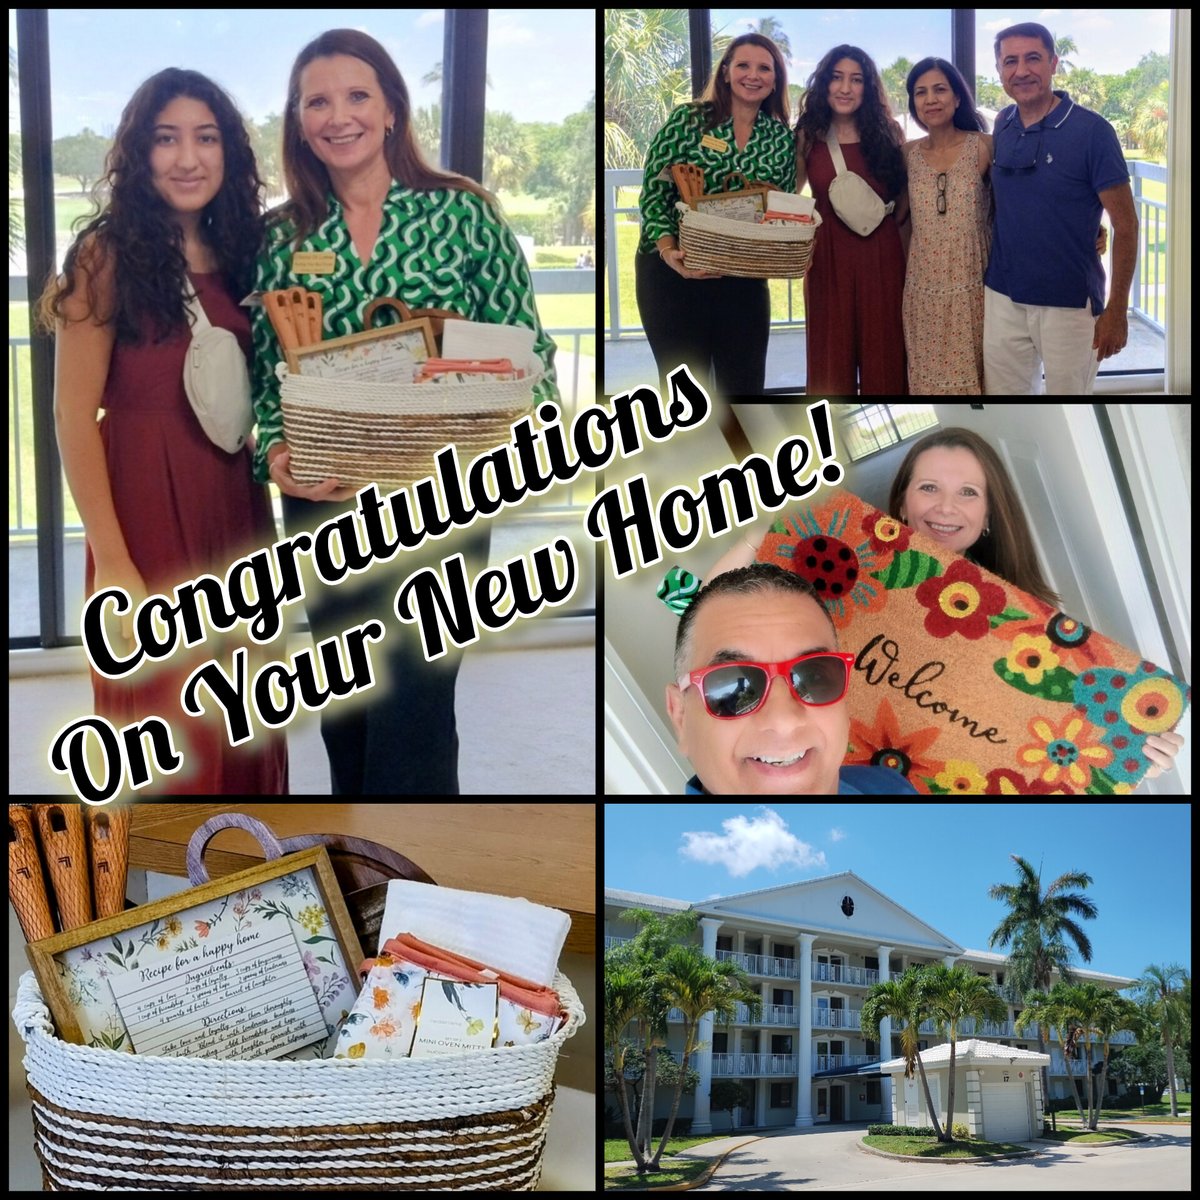 🎉 Congratulations to my wonderful client for closing on her new home in West Palm Beach, Florida! 🏠 Are you next? Give me a Call/Text anytime at (561) 644-0578 to discuss your Florida real estate goals. 🌴🌞 Christie Di Lemme Florida Homes Realty and Mortgage #florida